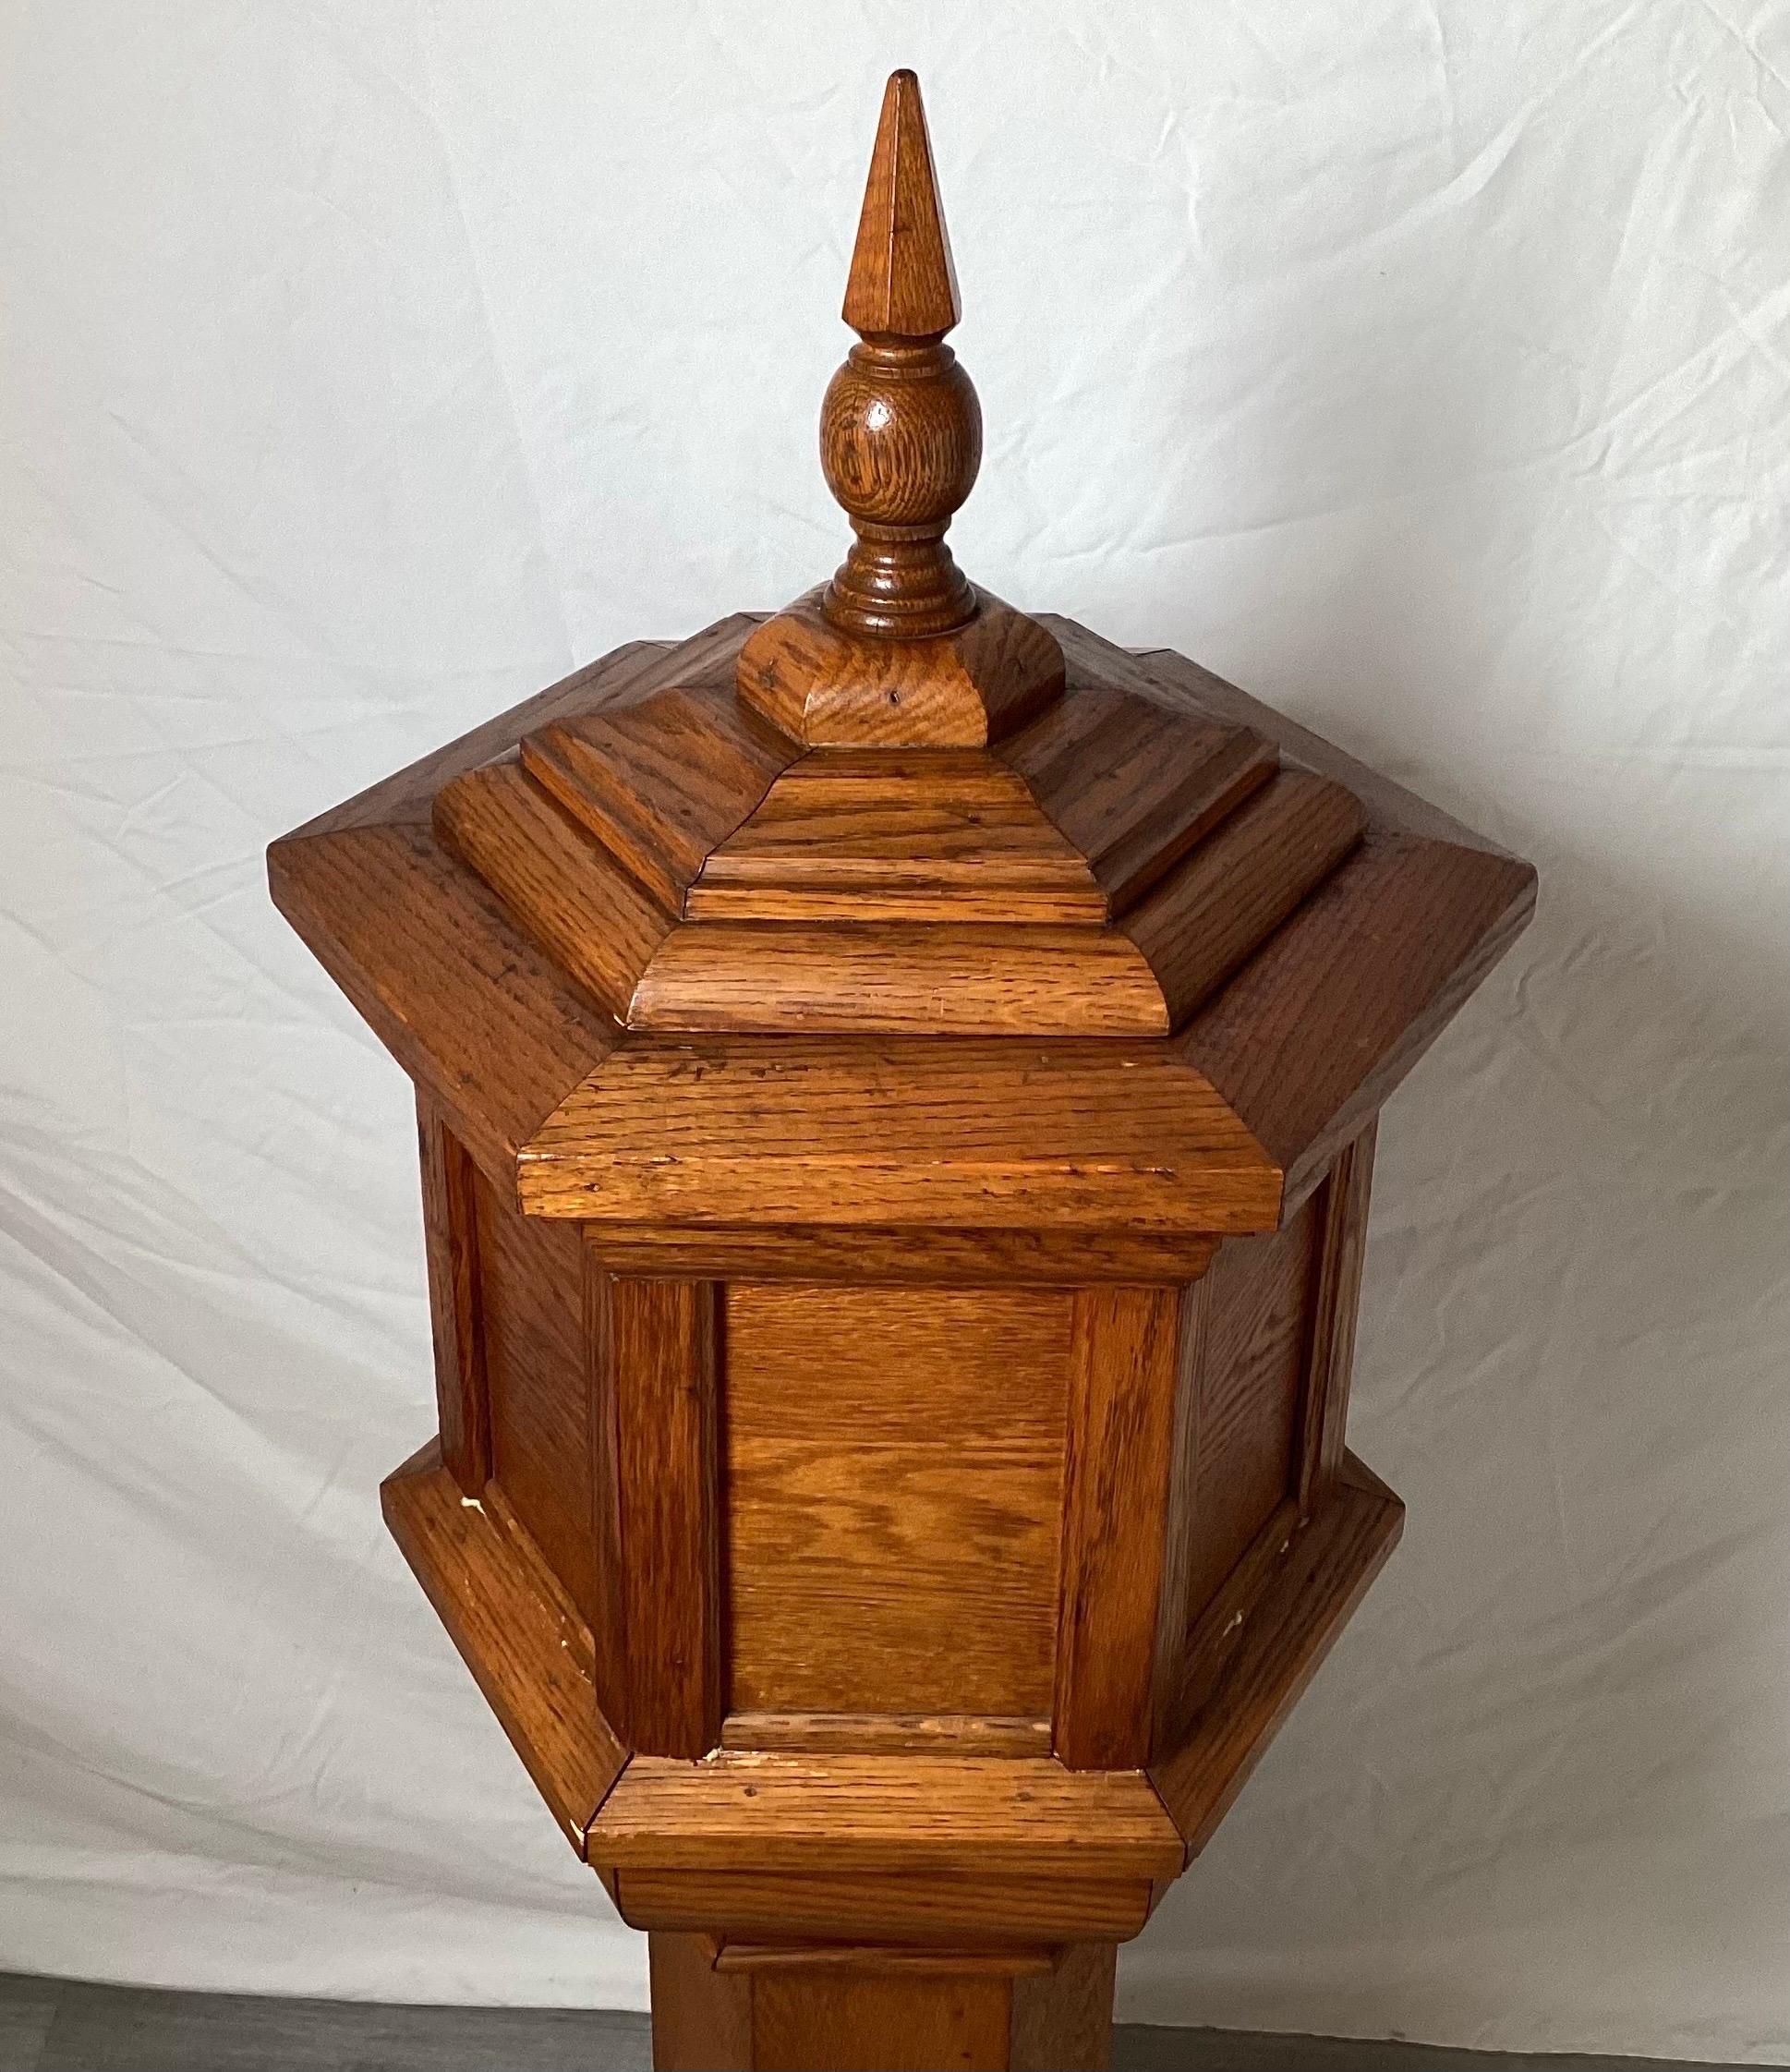 A six sided hand made quarter sawn oak jardinière with copper liner, originally thought to be a baptismal stand, Signed under base and dated 1939, 47 inches tall, 15 by 15 inches.